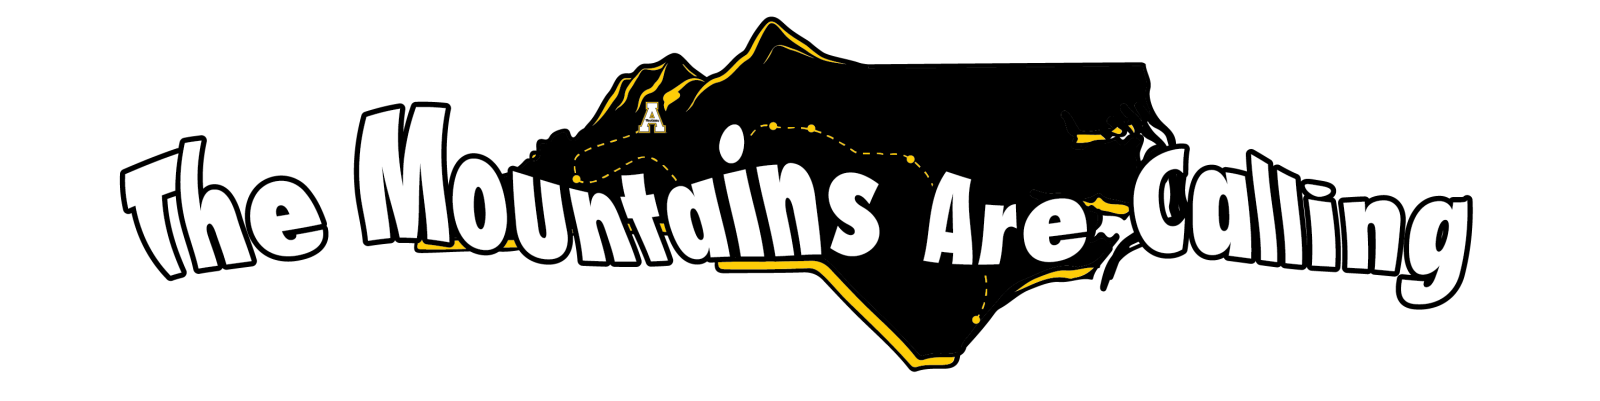 The Mountains Are Calling logo. Shows a design of the state of North Carolina with a route leading from Boone to Wilmington.